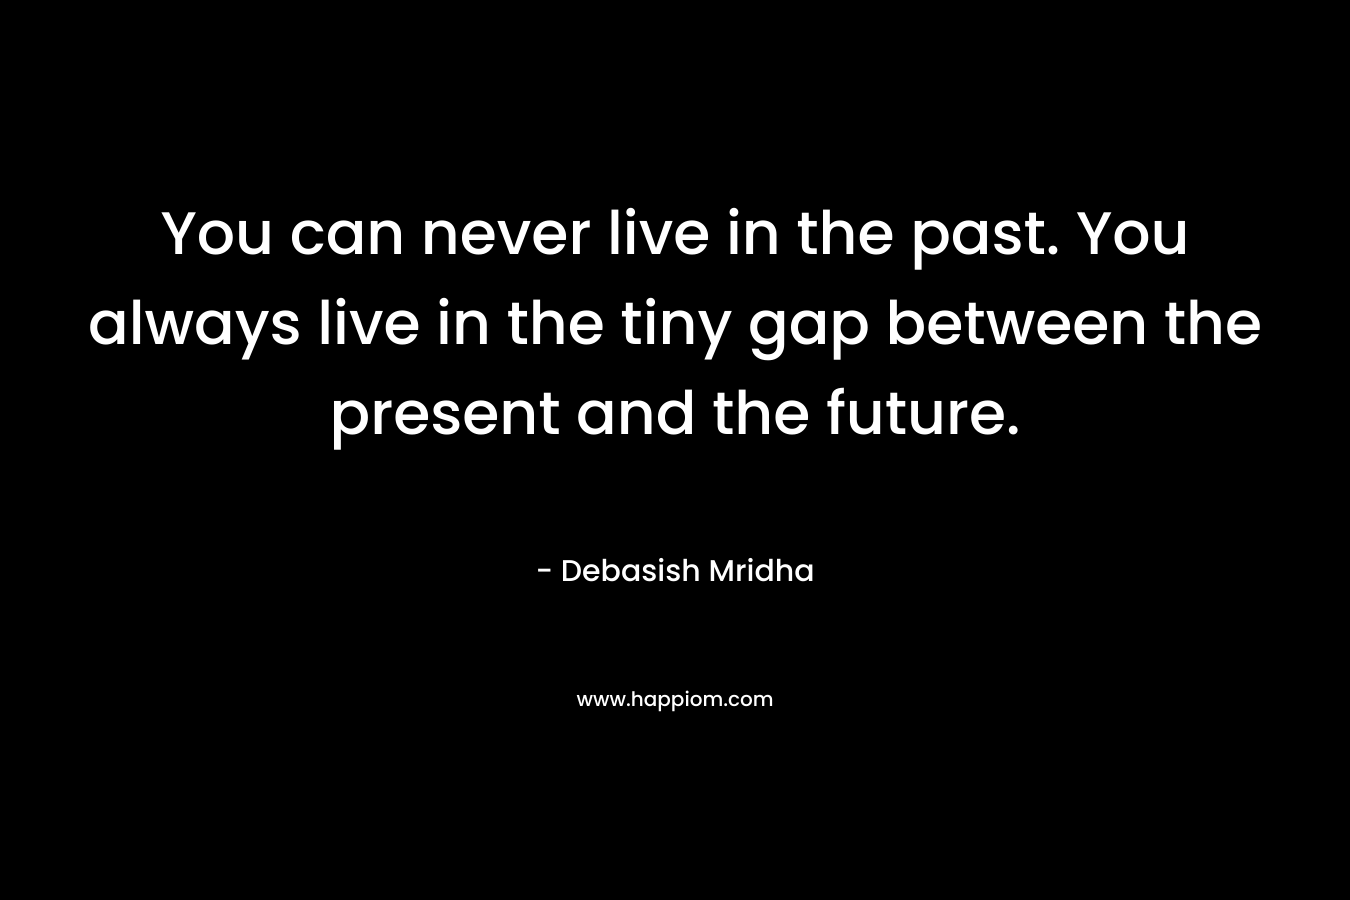 You can never live in the past. You always live in the tiny gap between the present and the future.